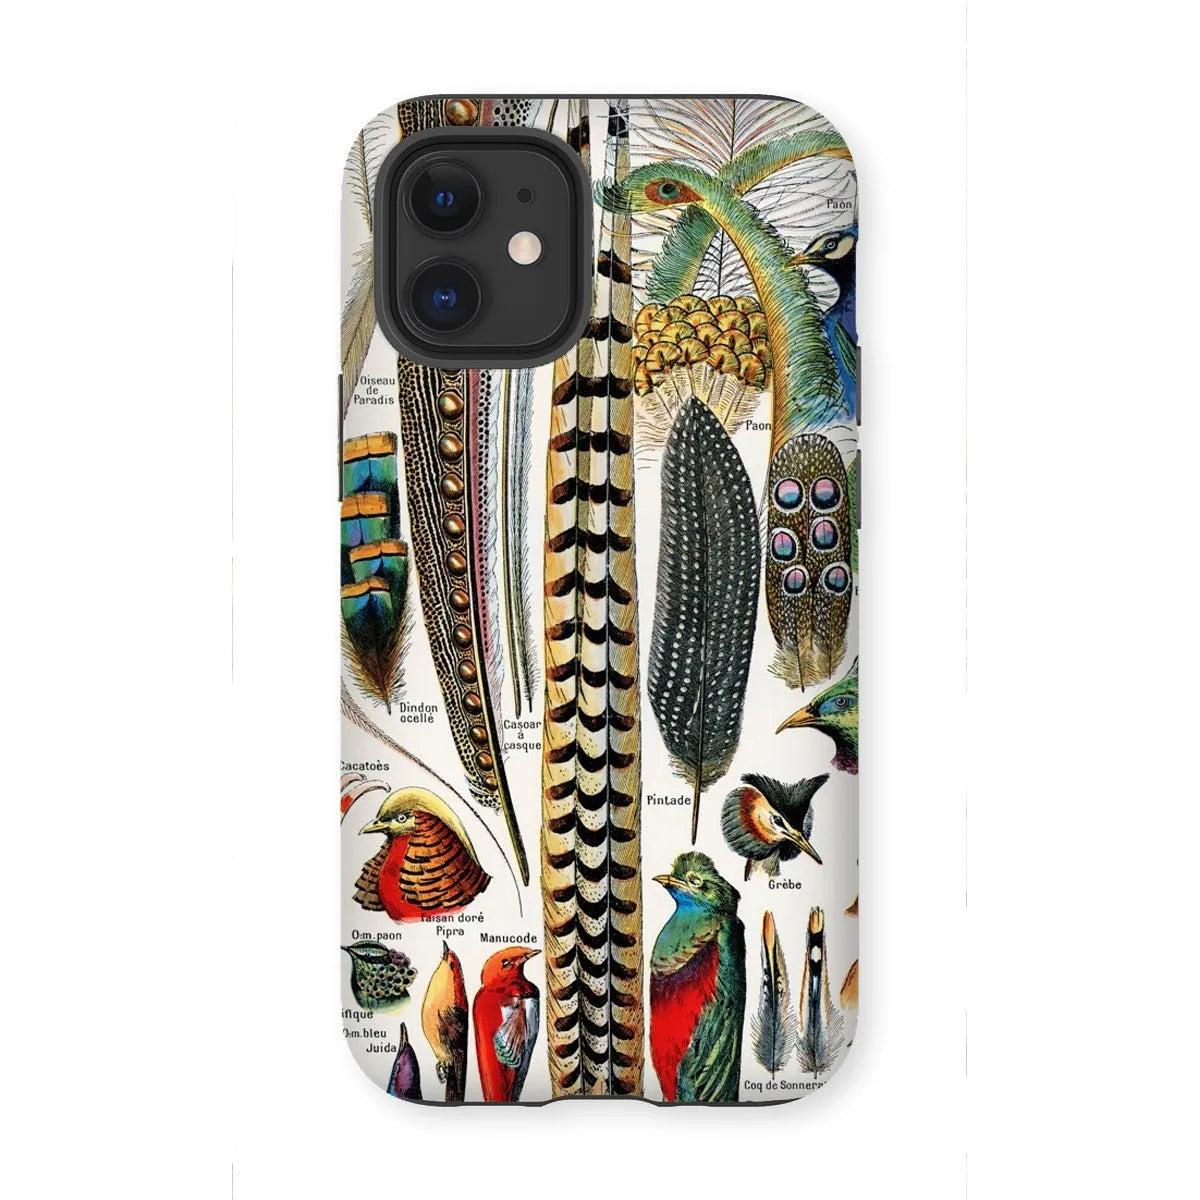 Plumes - Feathers - Adolphe Millot Tough Phone Case - Iphone 12 Mini / Matte - Mobile Phone Cases - Aesthetic Art